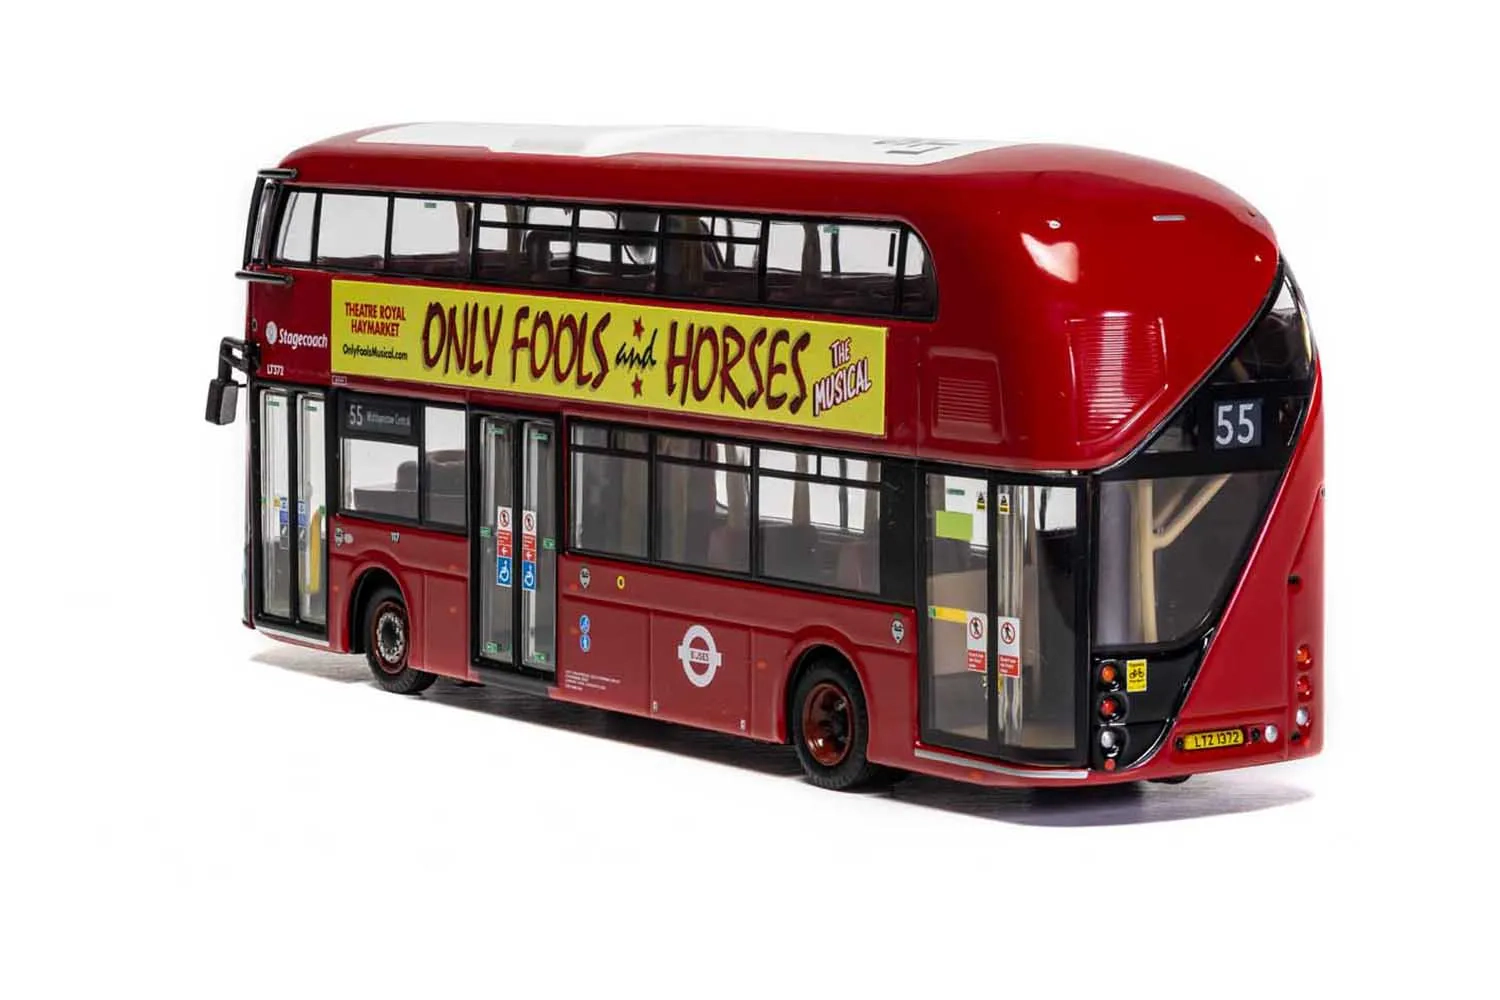 Wrightbus New Routemaster, 'Only Fools and Horses Stage Show', Route 55 Walthamstow Central